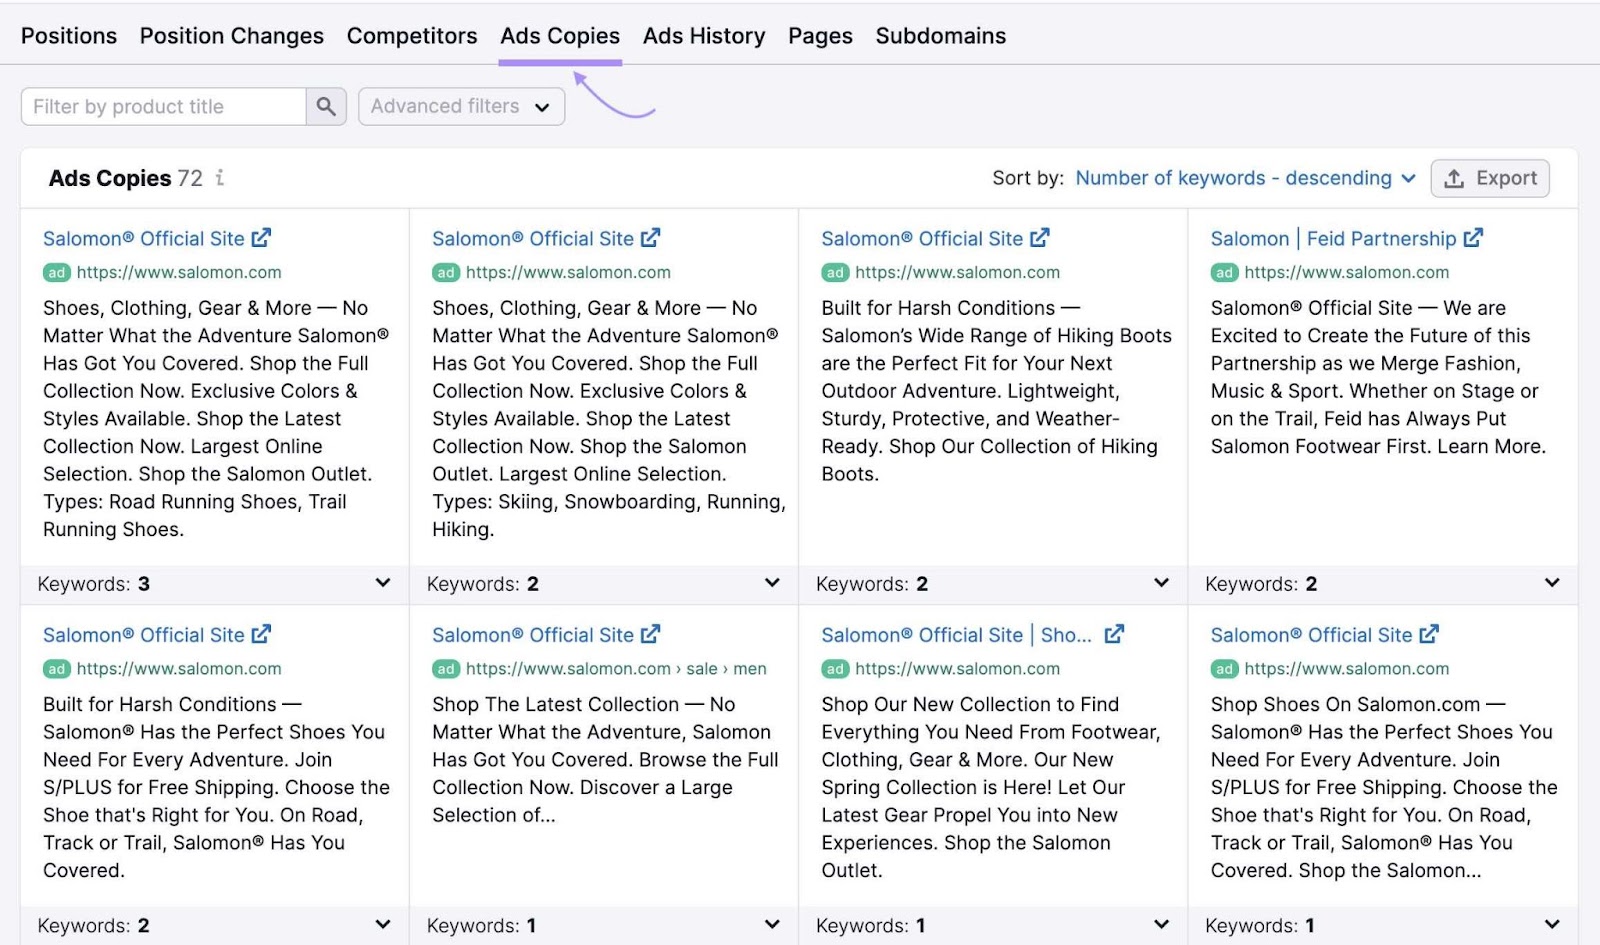 List of competitor ad copies in the Advertising Research tool.